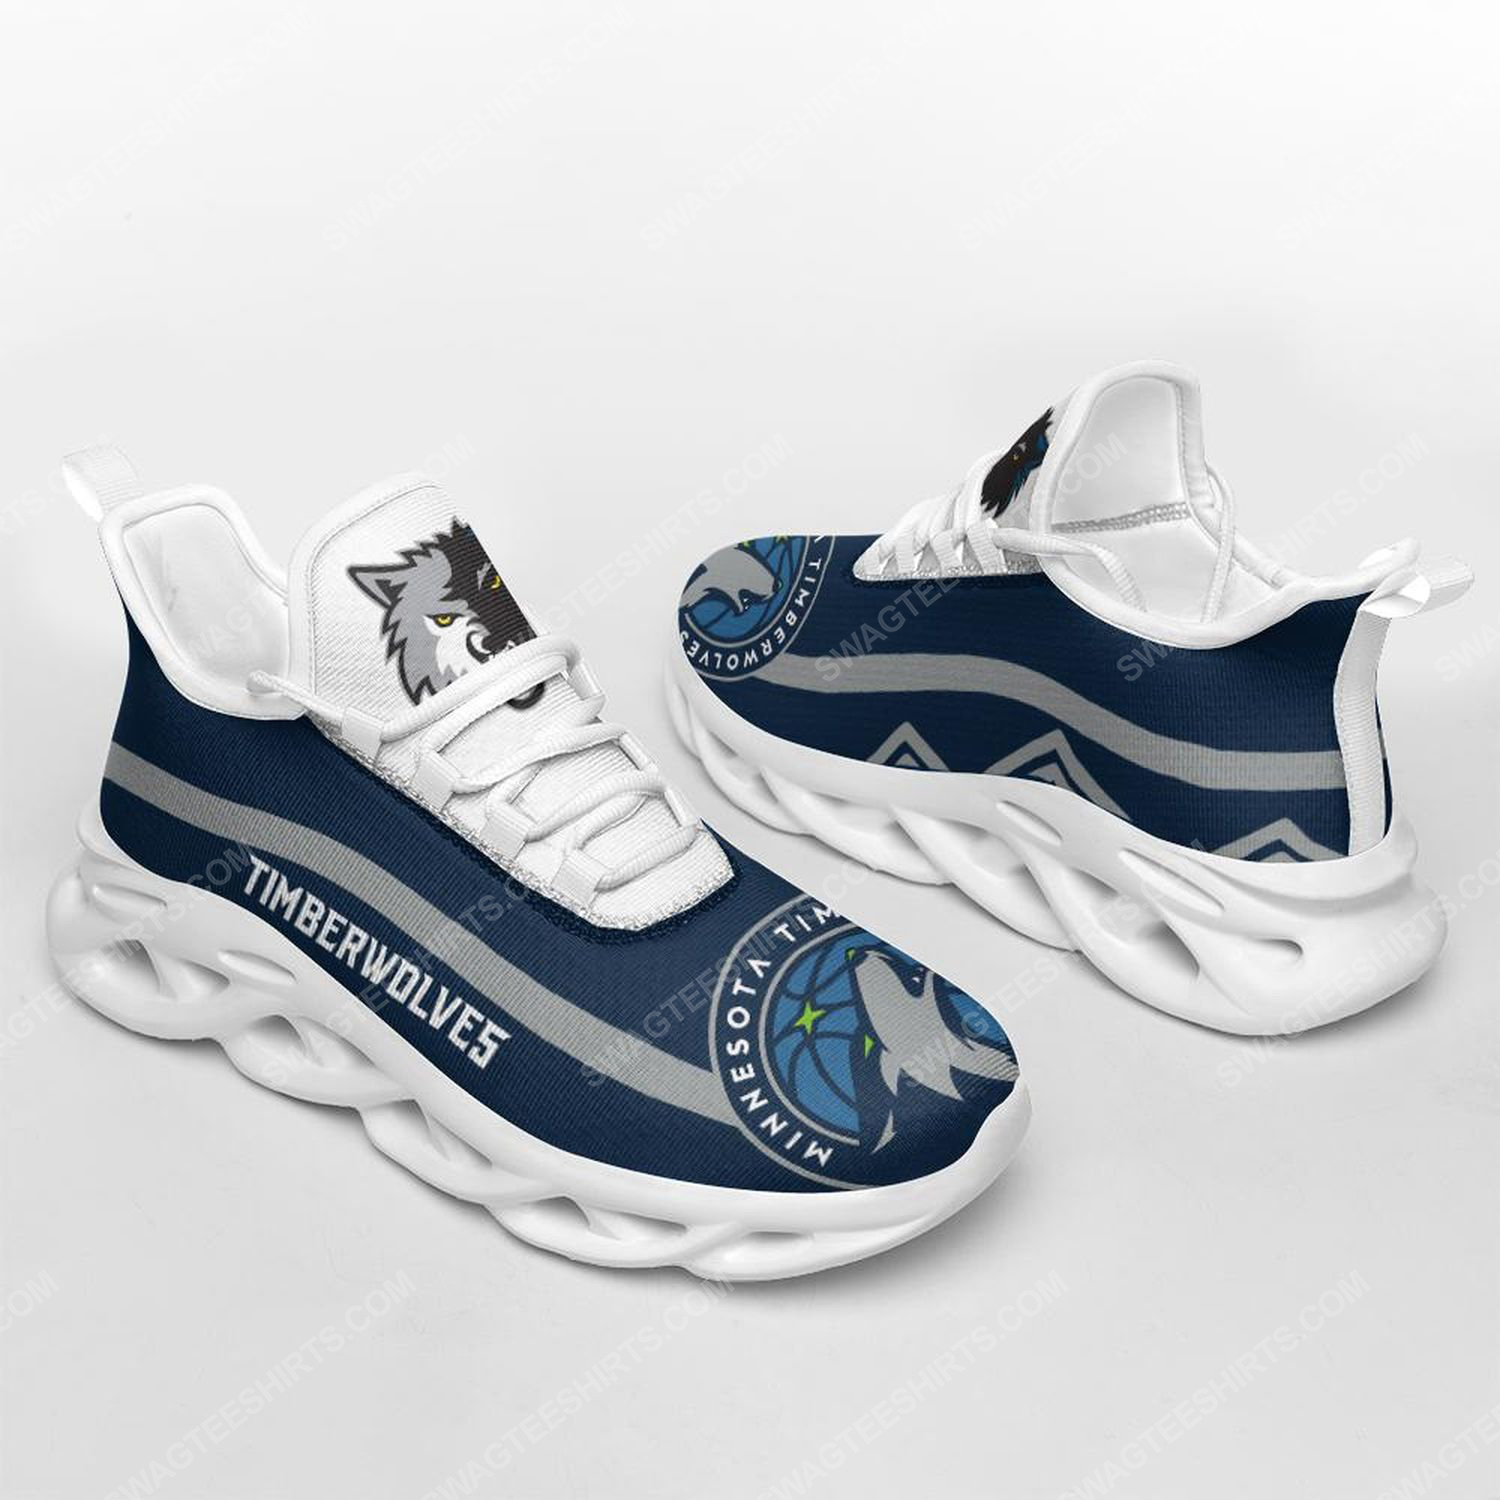 [special edition] The minnesota timberwolves basketball team max soul shoes – Maria